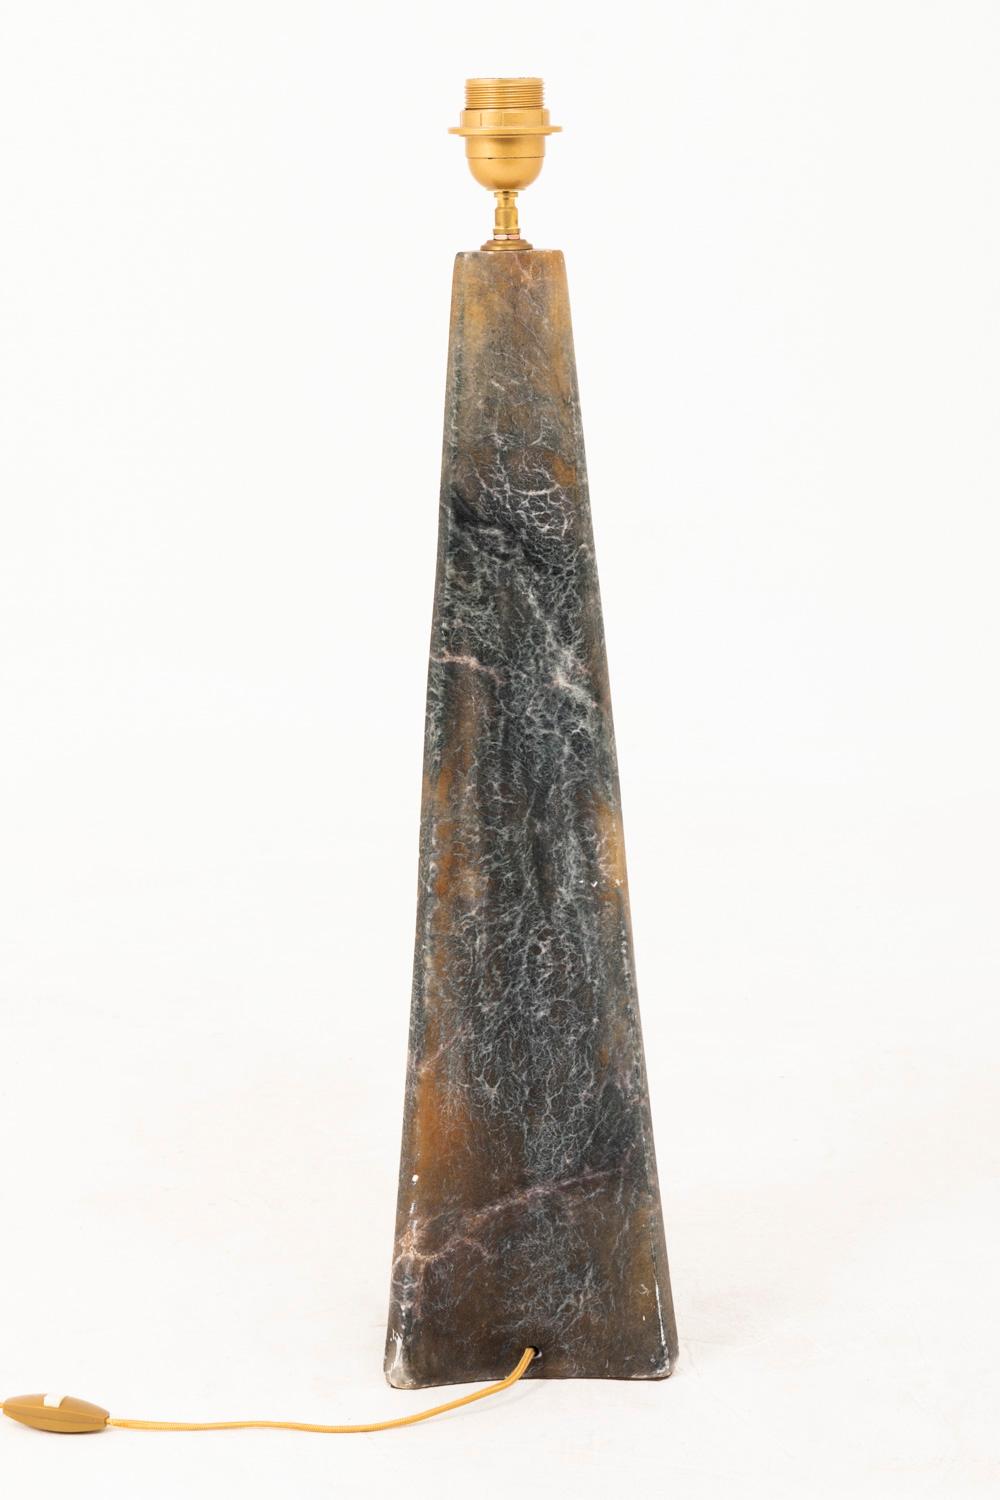 French Triangular Lamp in Onyx, 20th Century For Sale